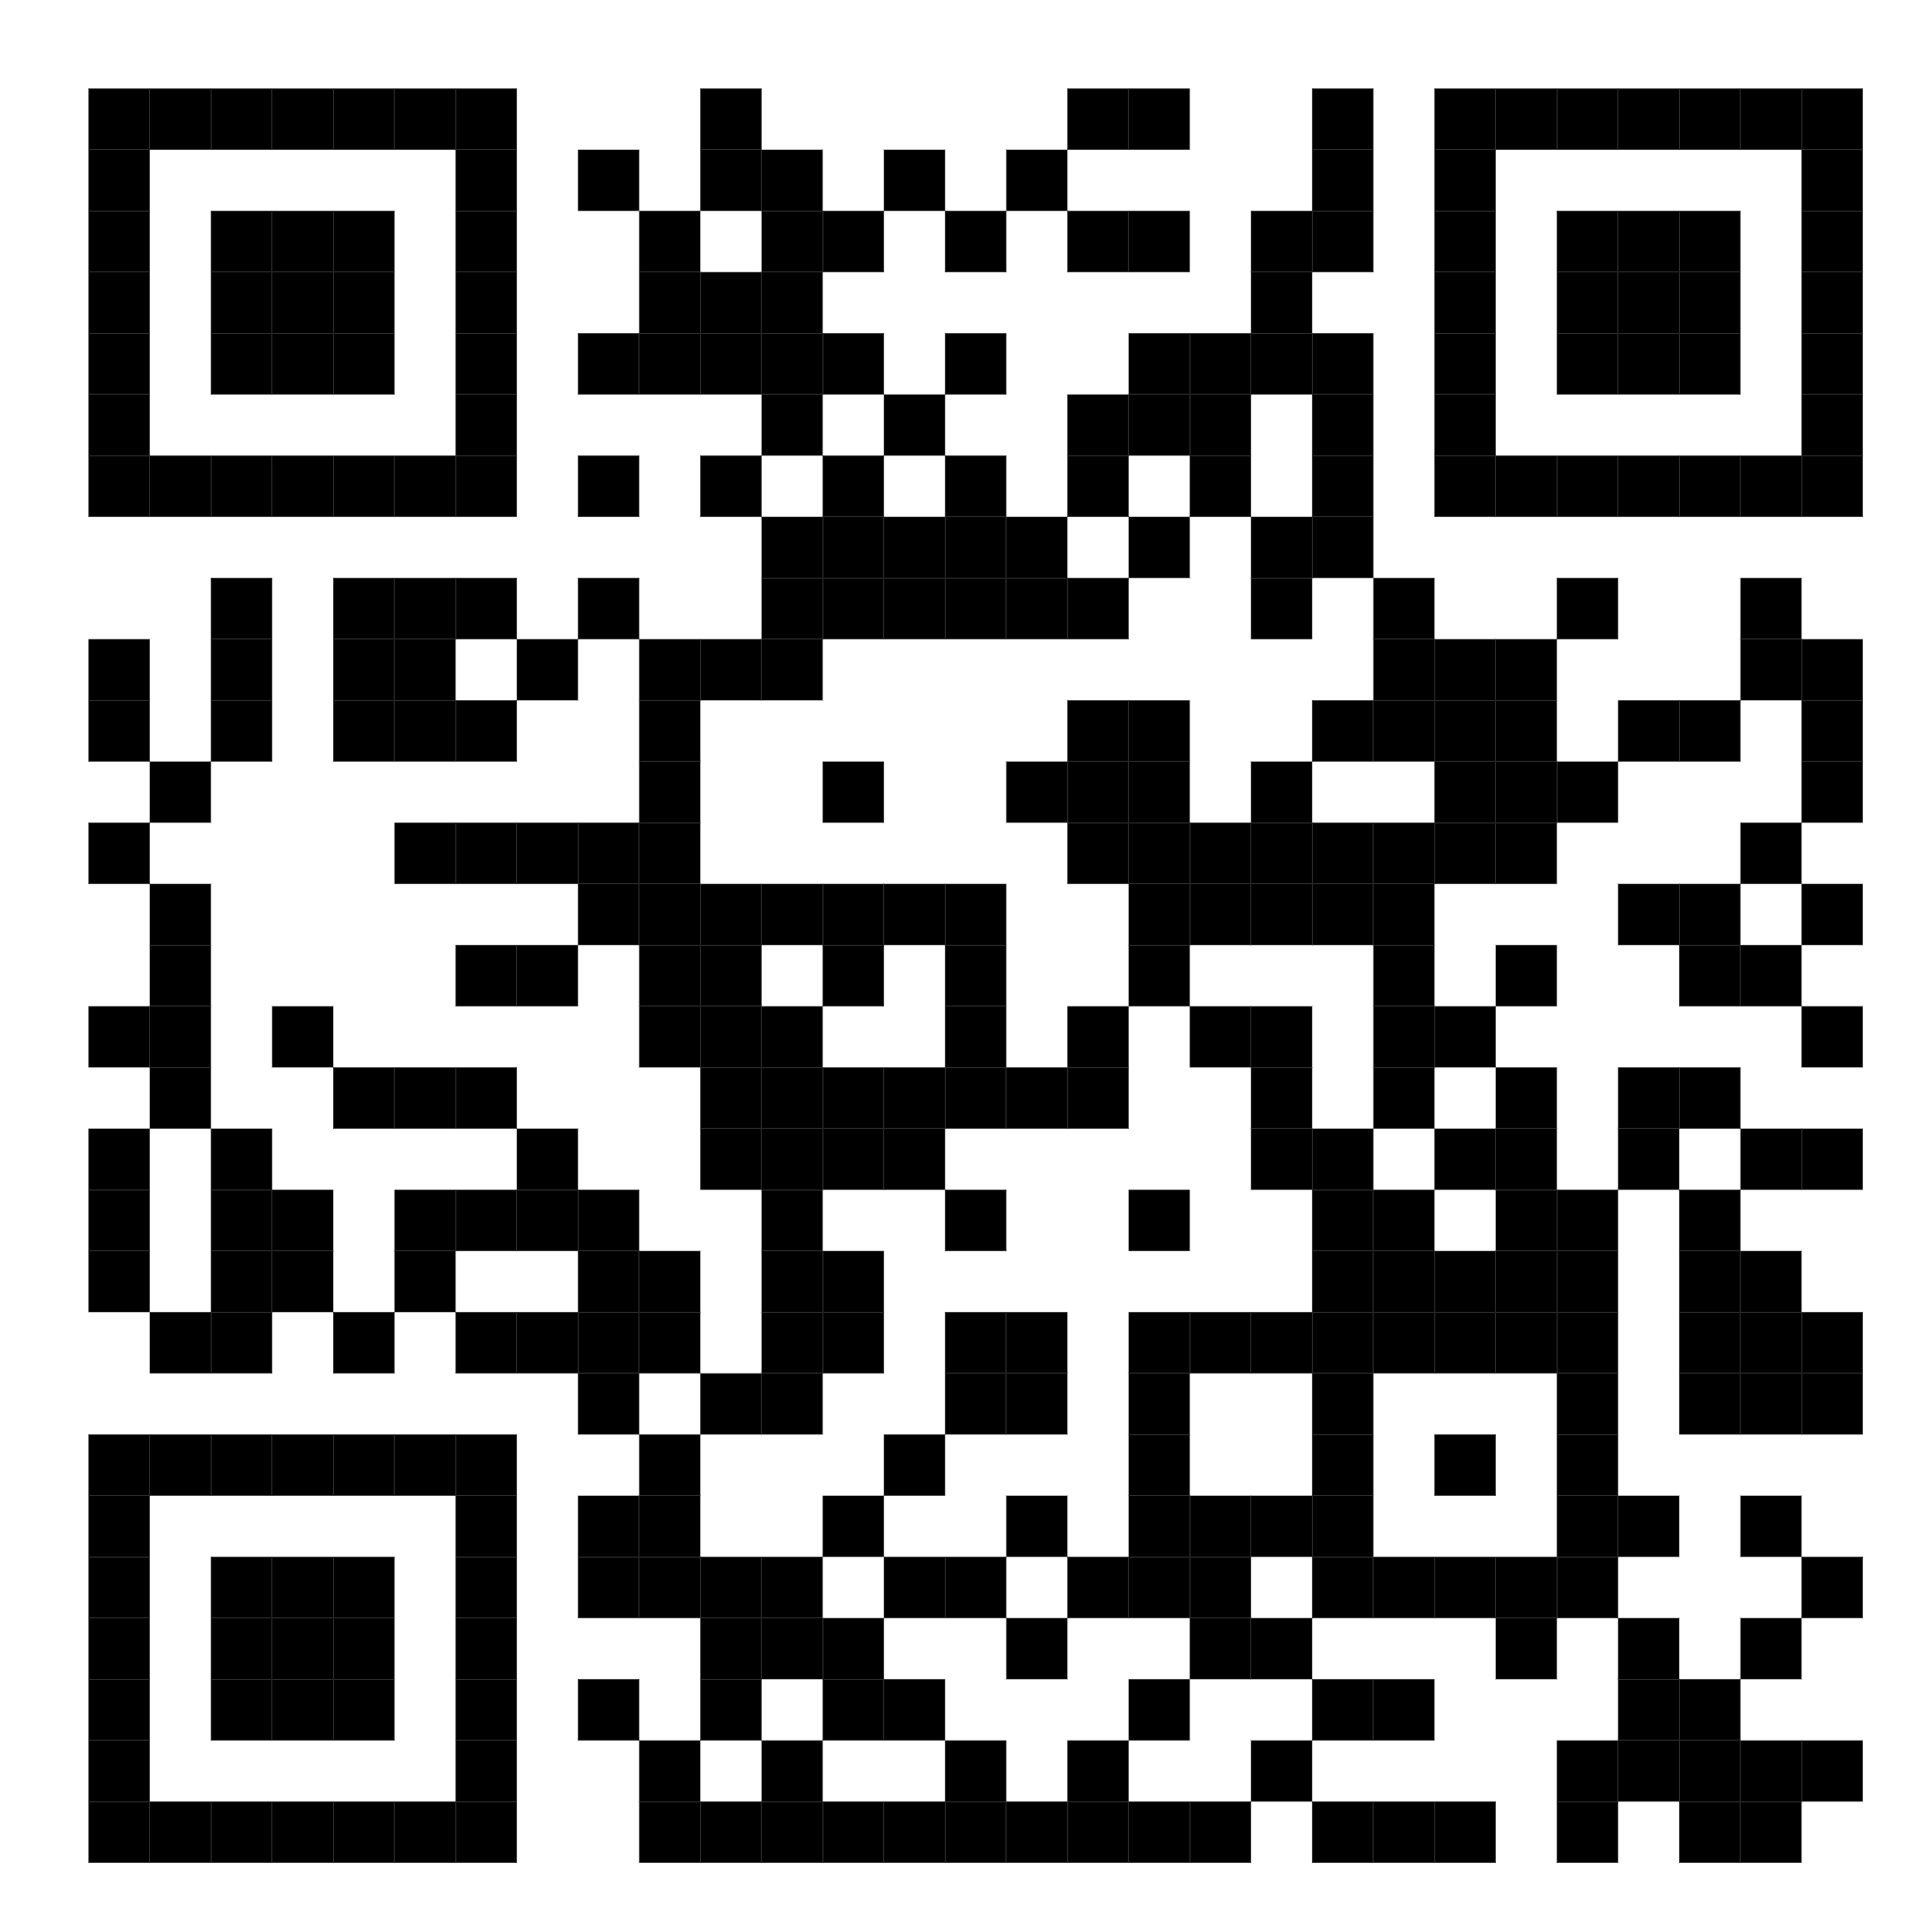 qrcode-56553738-undefined.png